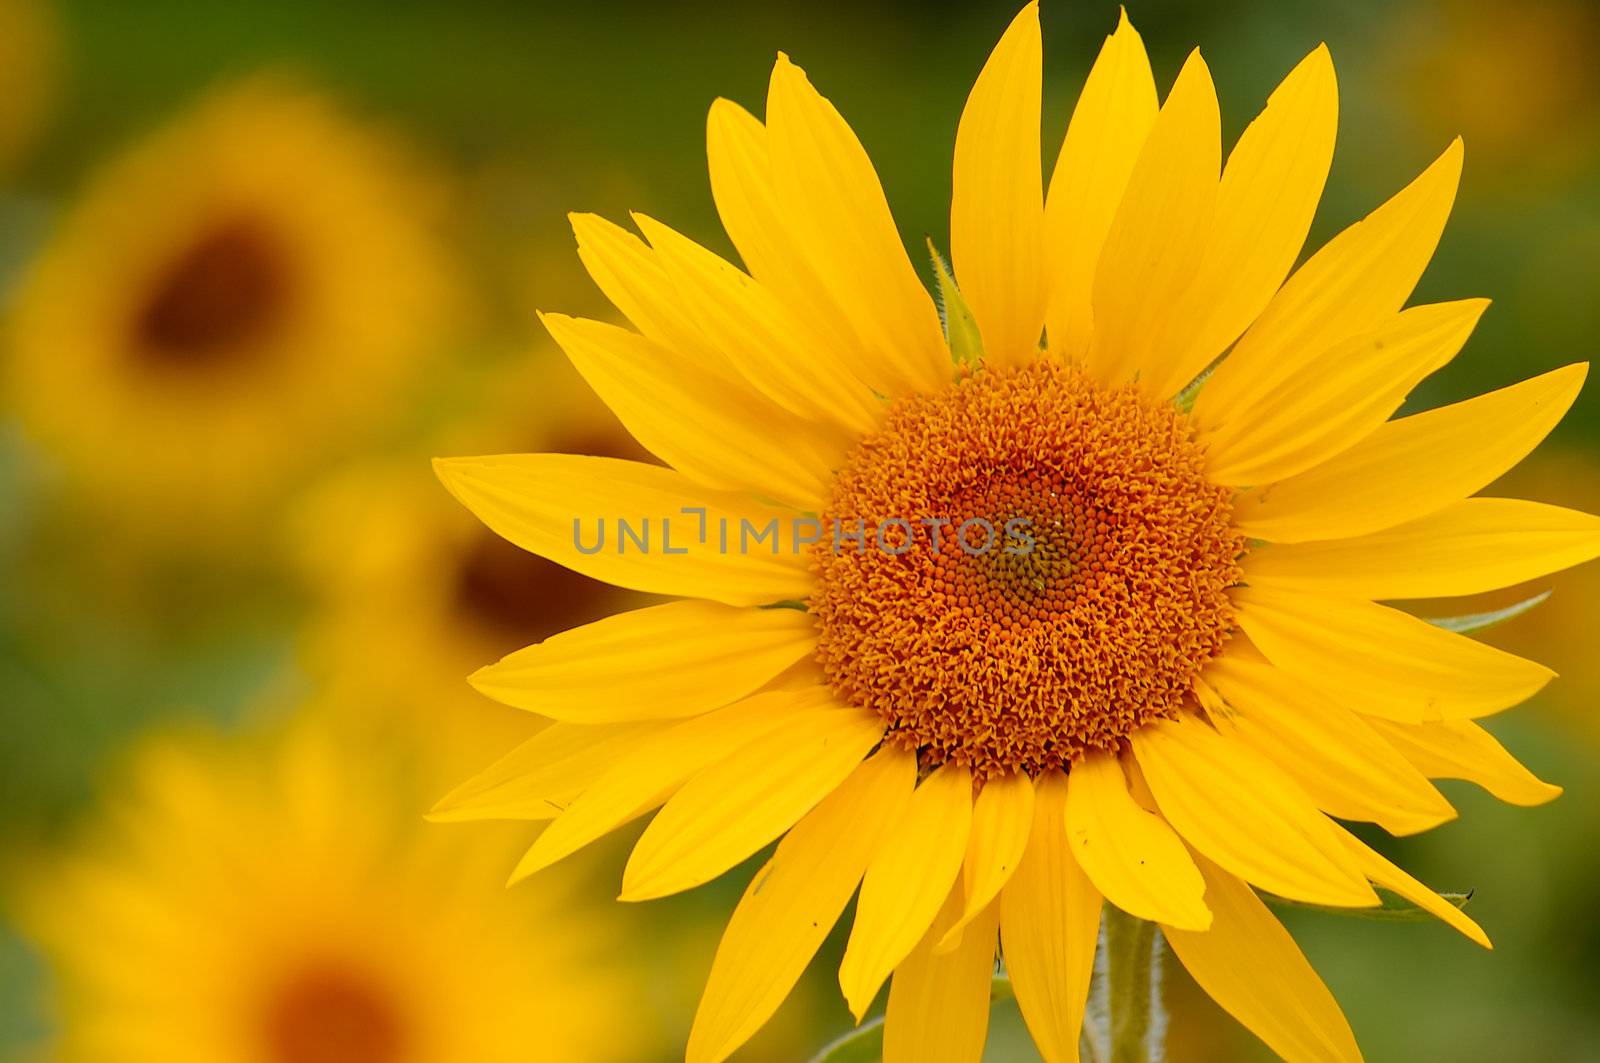 Here comes the sun(flower) by Talanis